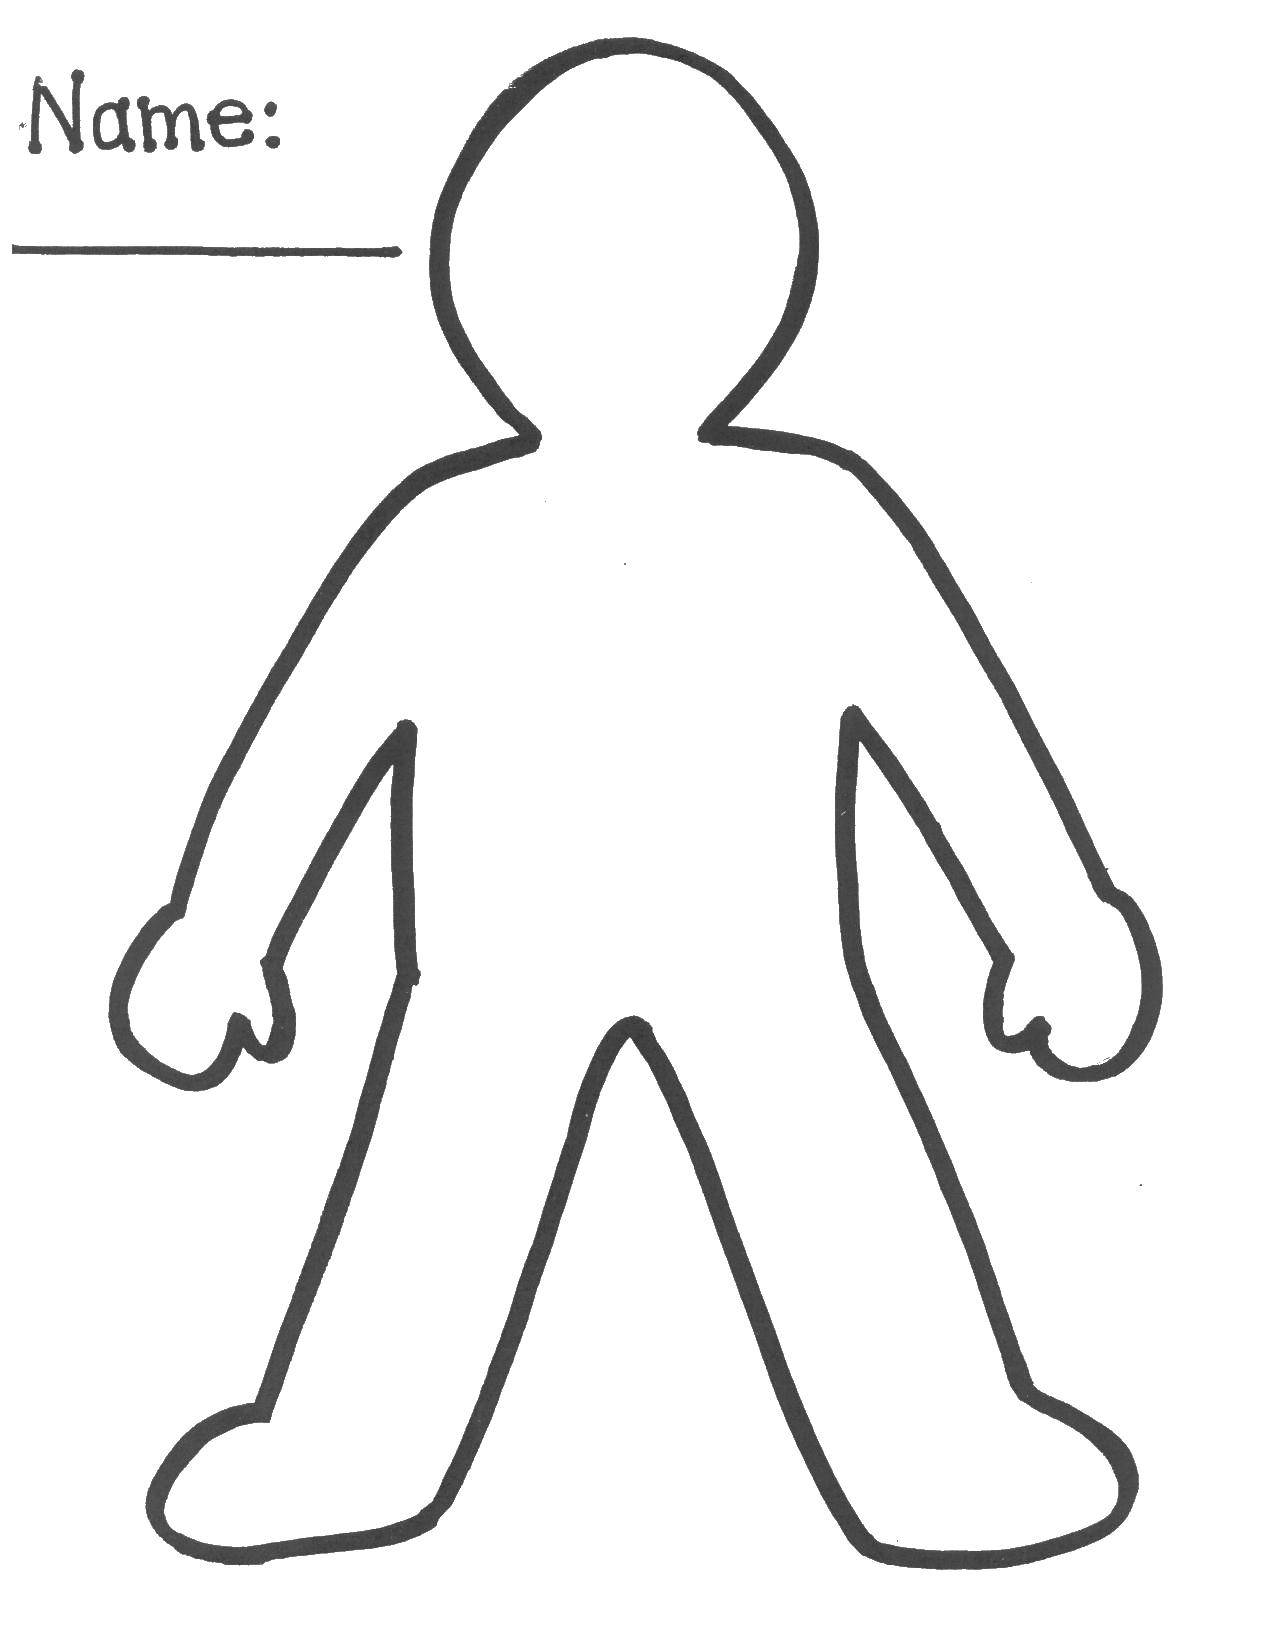 Coloring Call man. Category The contour of the doll . Tags:  contour, doll, man.